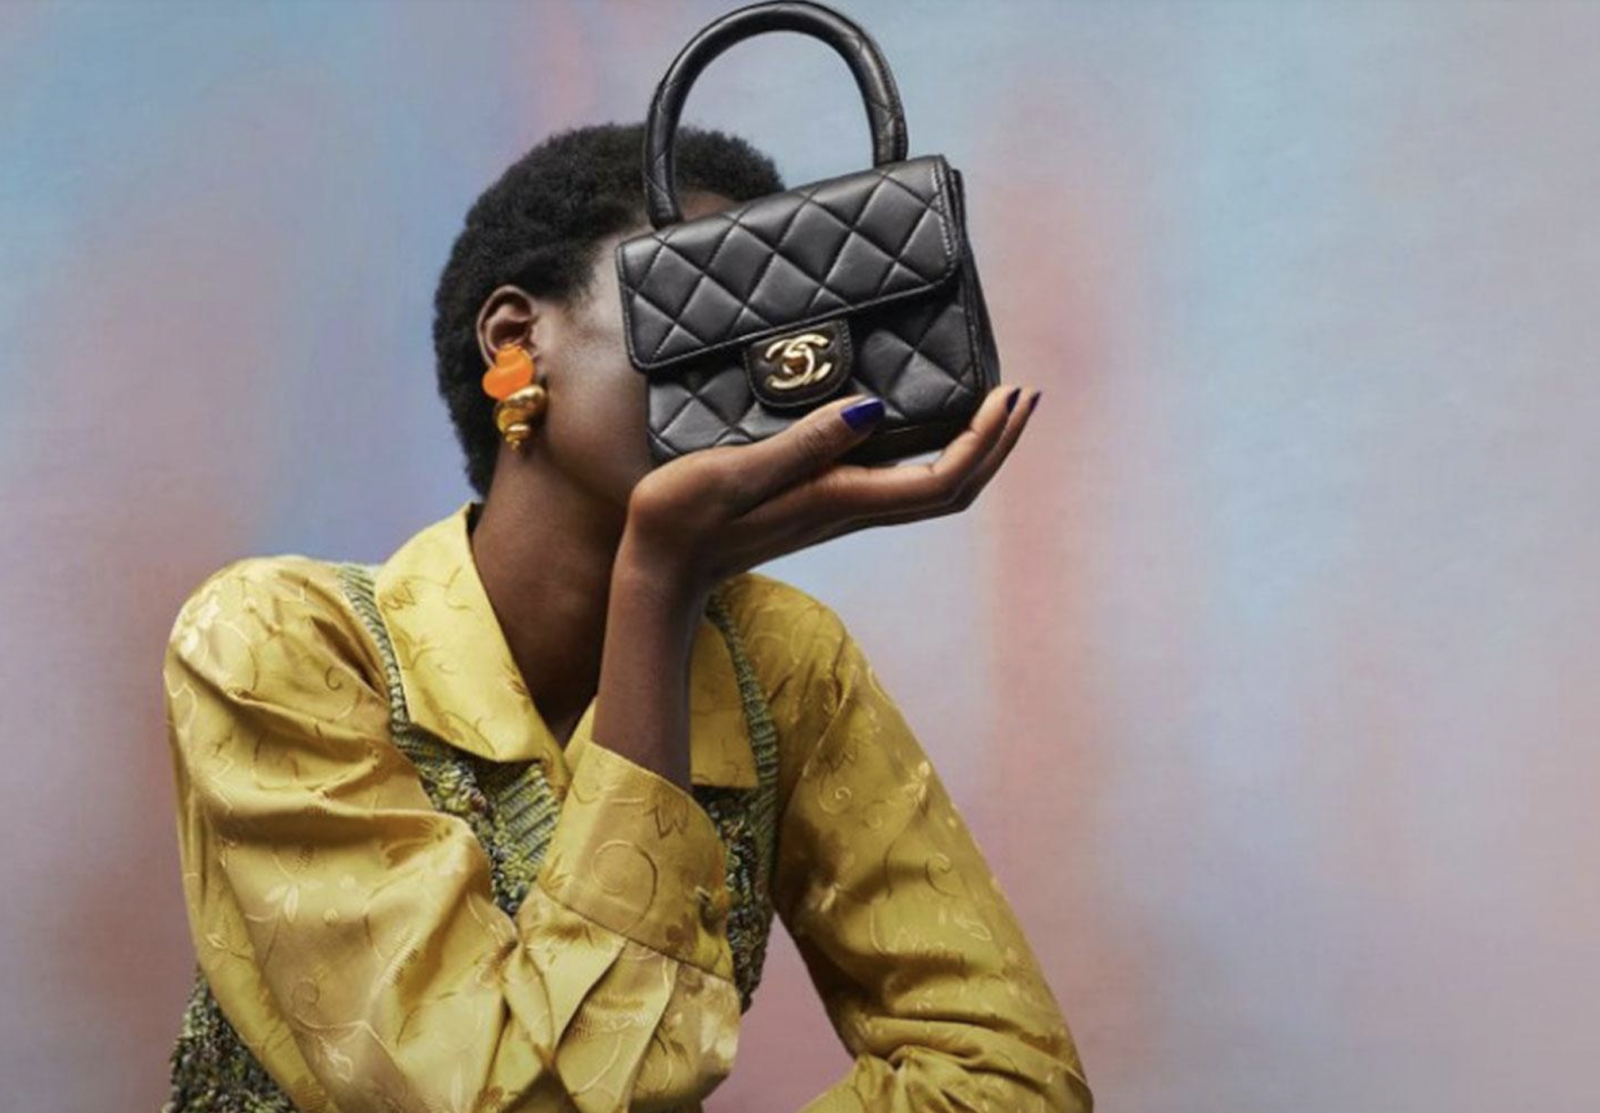 A woman holding a Chanel bag